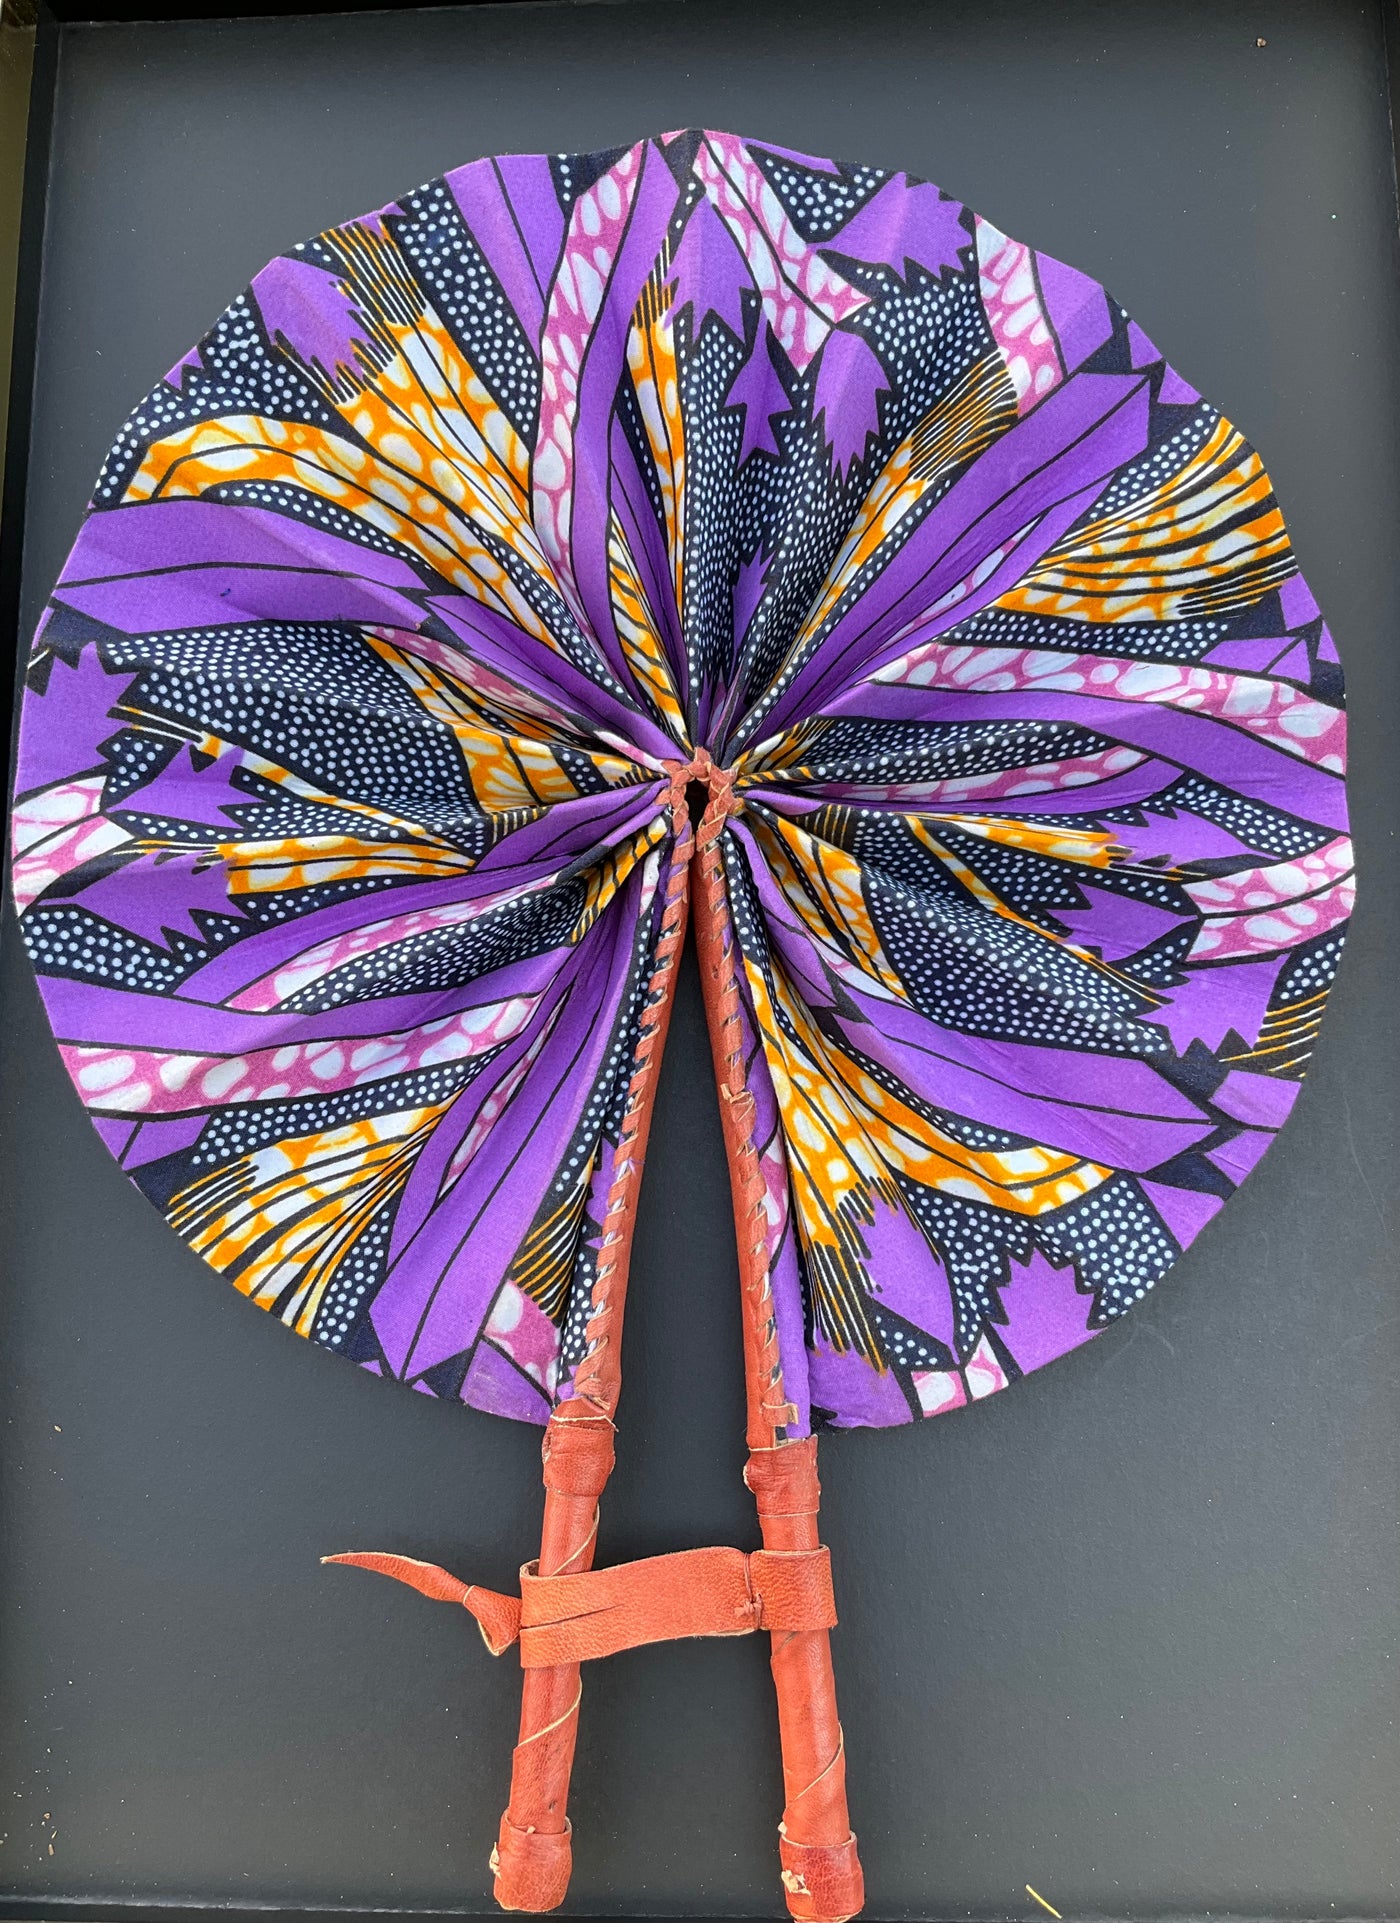 Decorative & Functional Traditional Ghanaian Fans